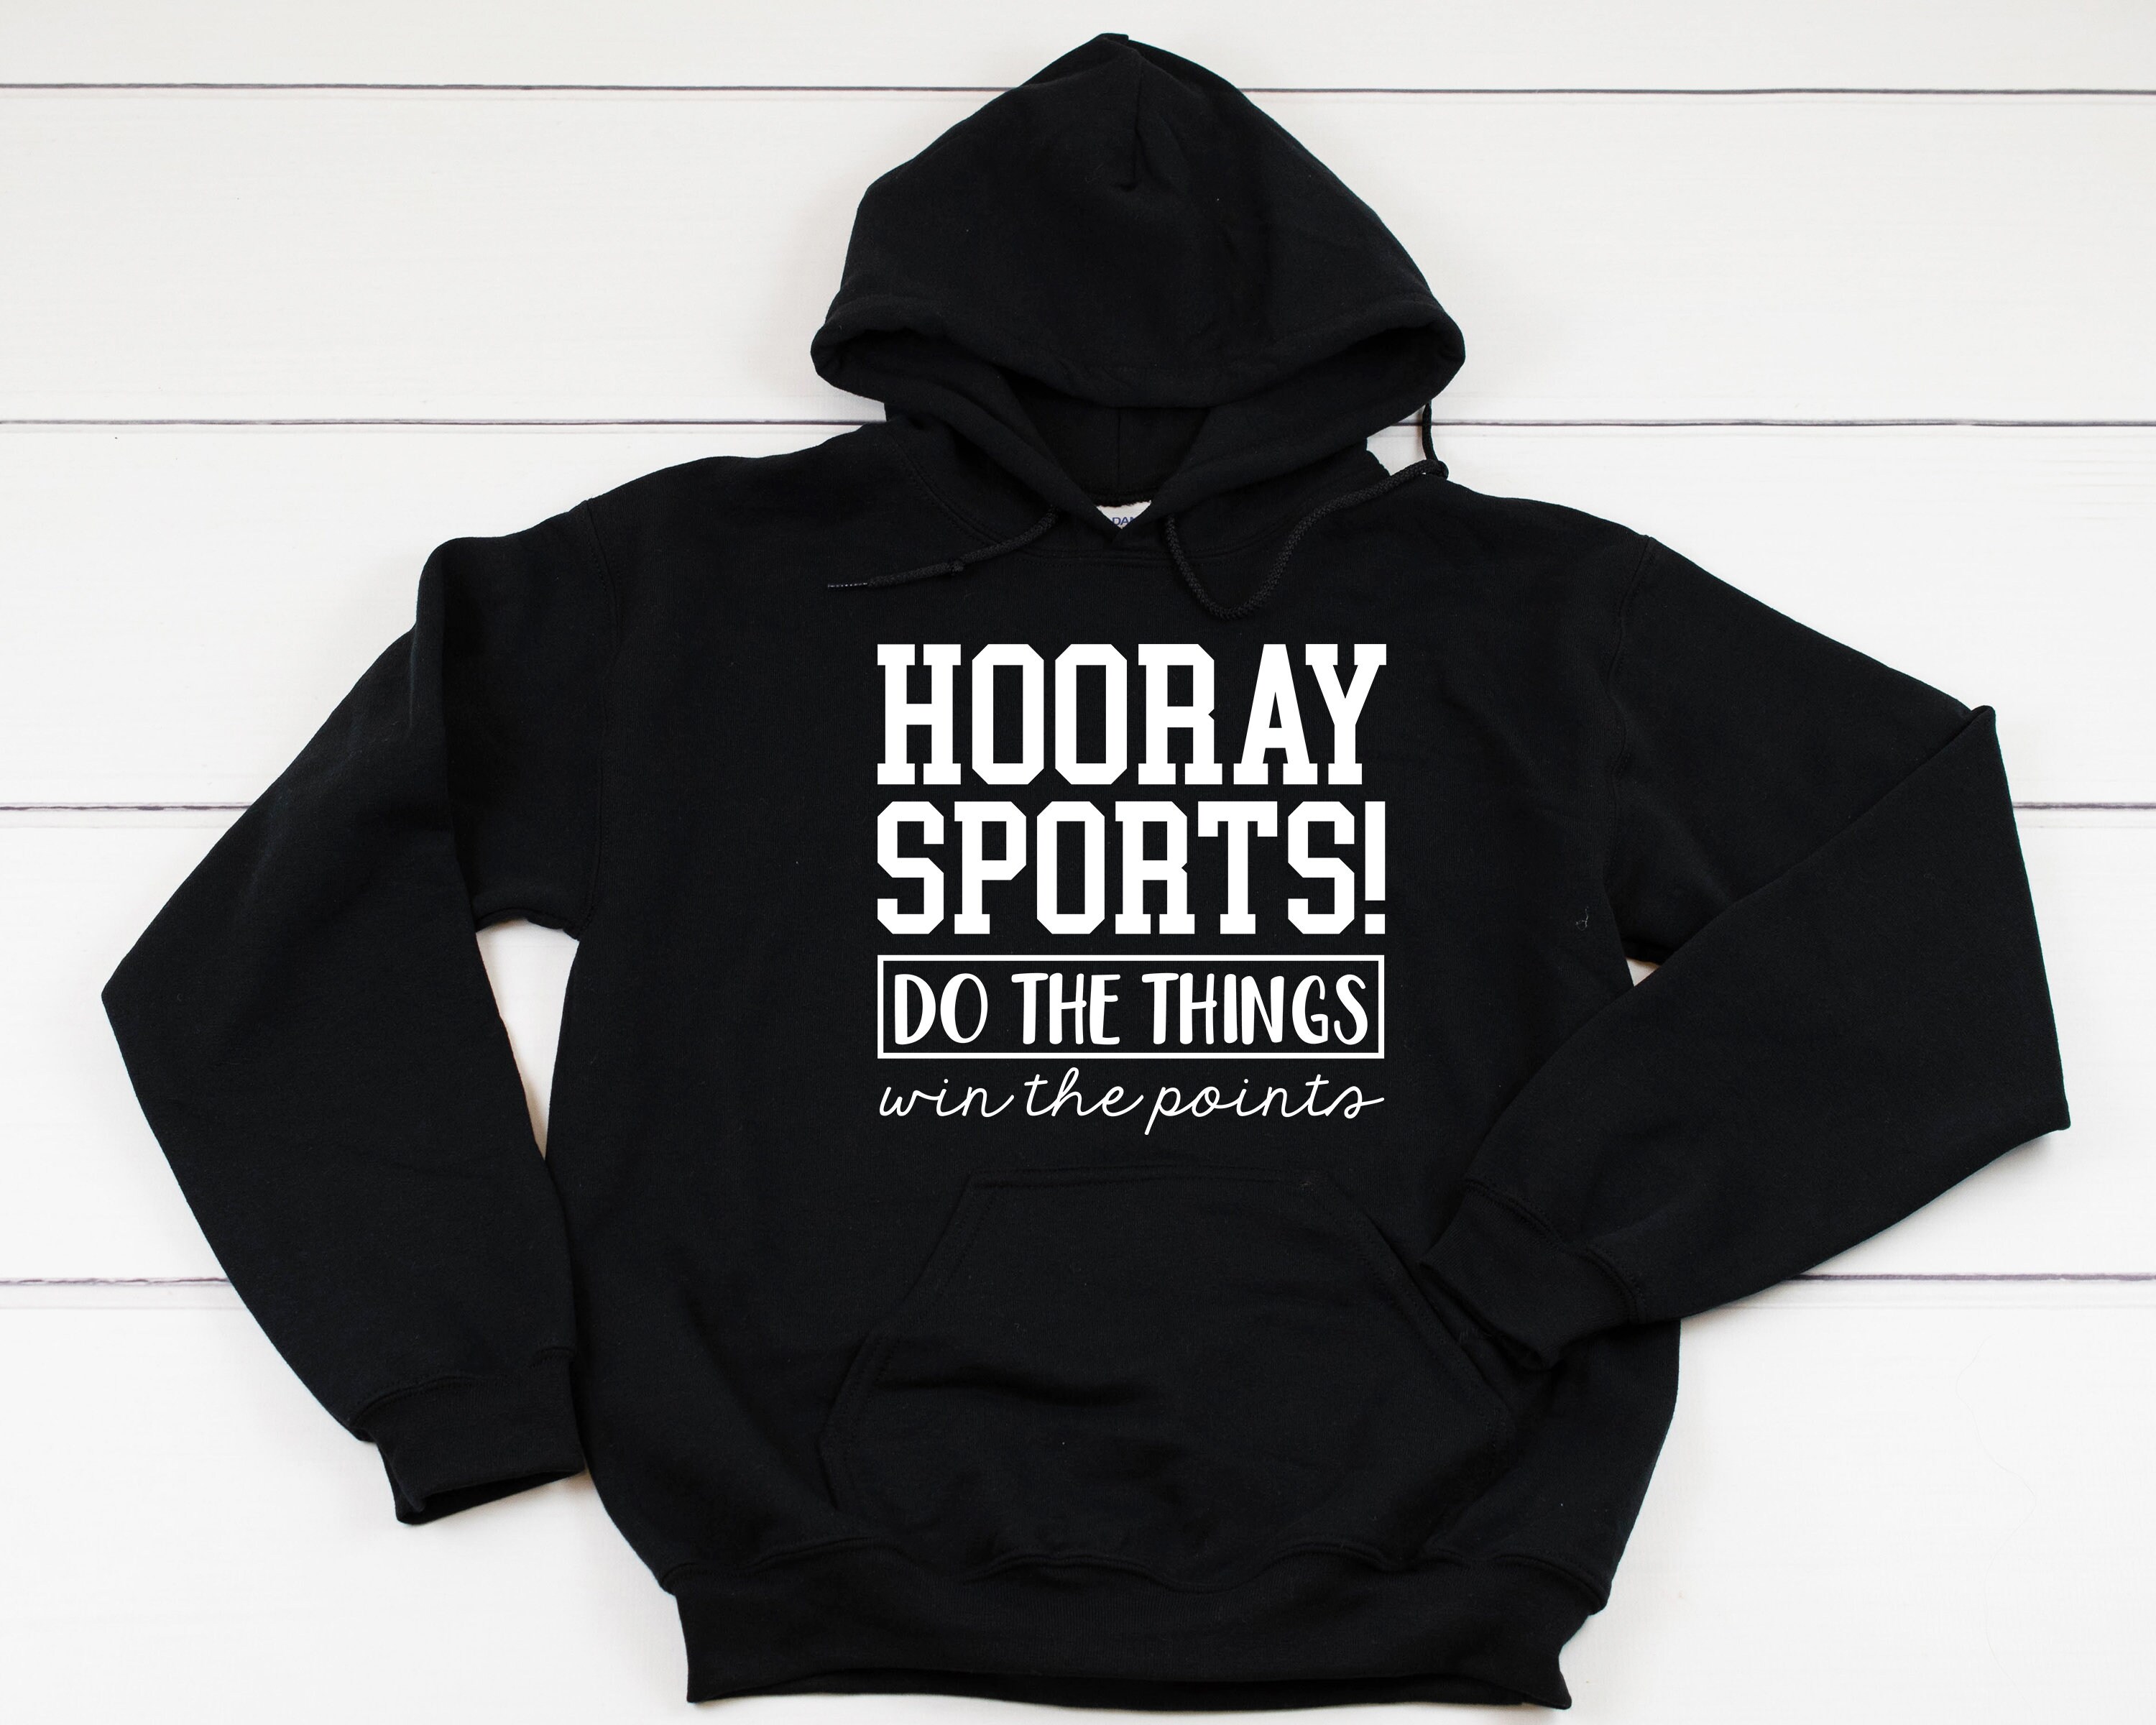 Hooray Sports Heavy Blend Hooded Sweatshirt Hoodie, Funny Football Sunday Game Day Day, Football, 12 Colors